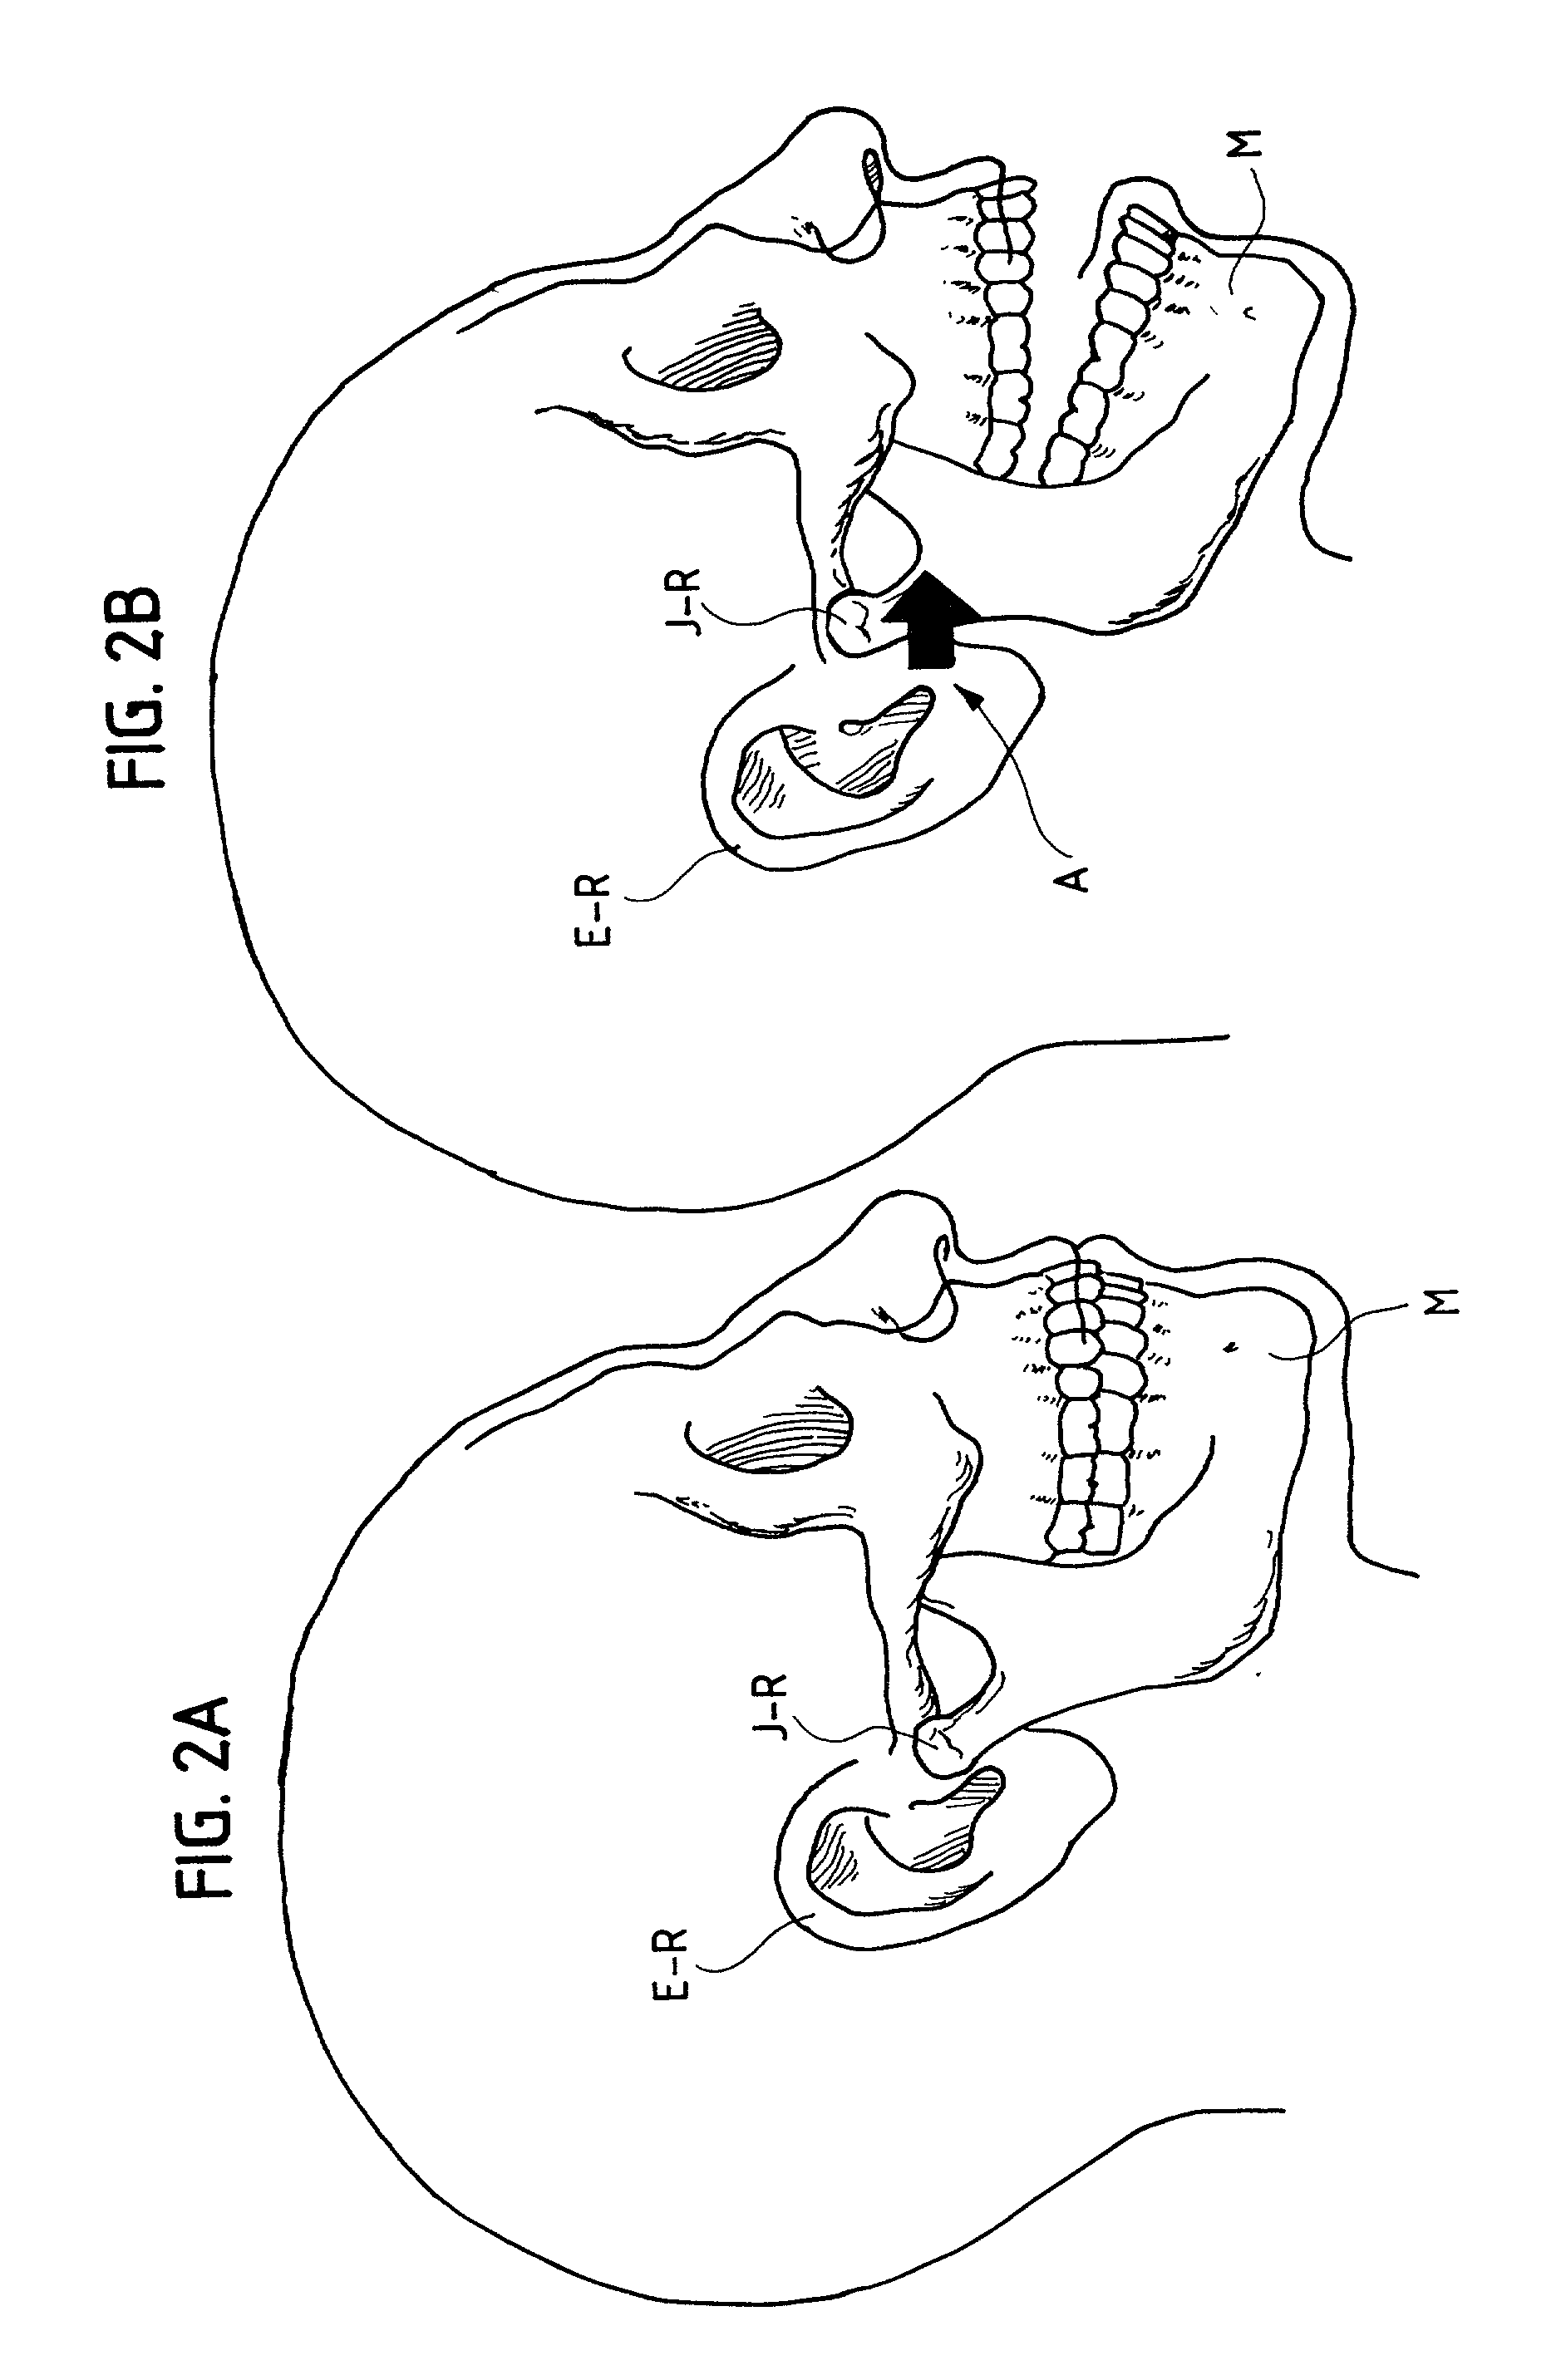 Compressible hearing aid